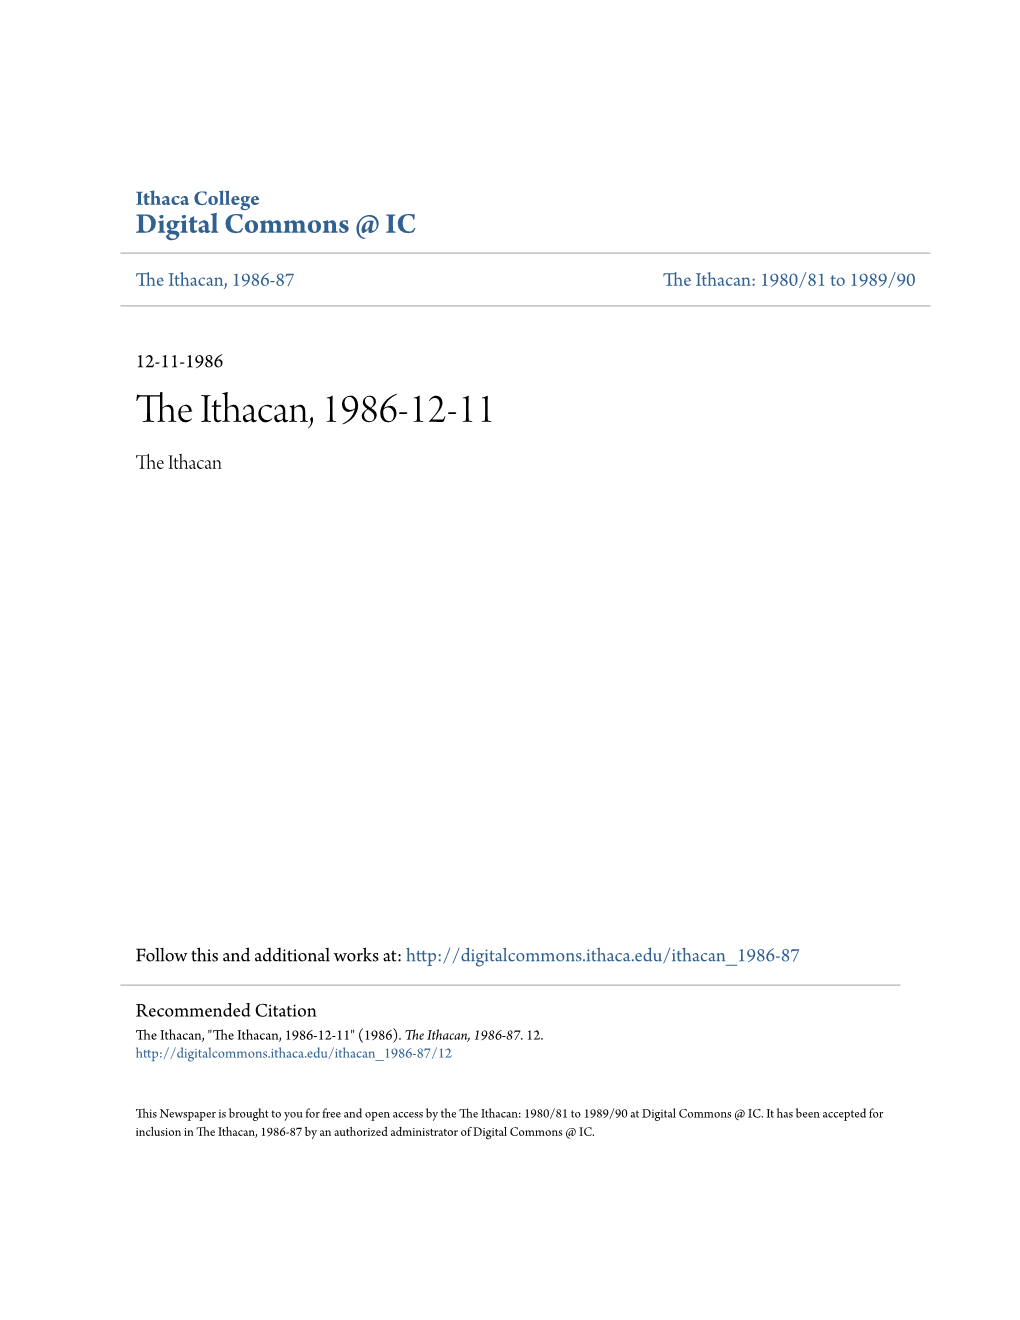 The Ithacan, 1986-12-11